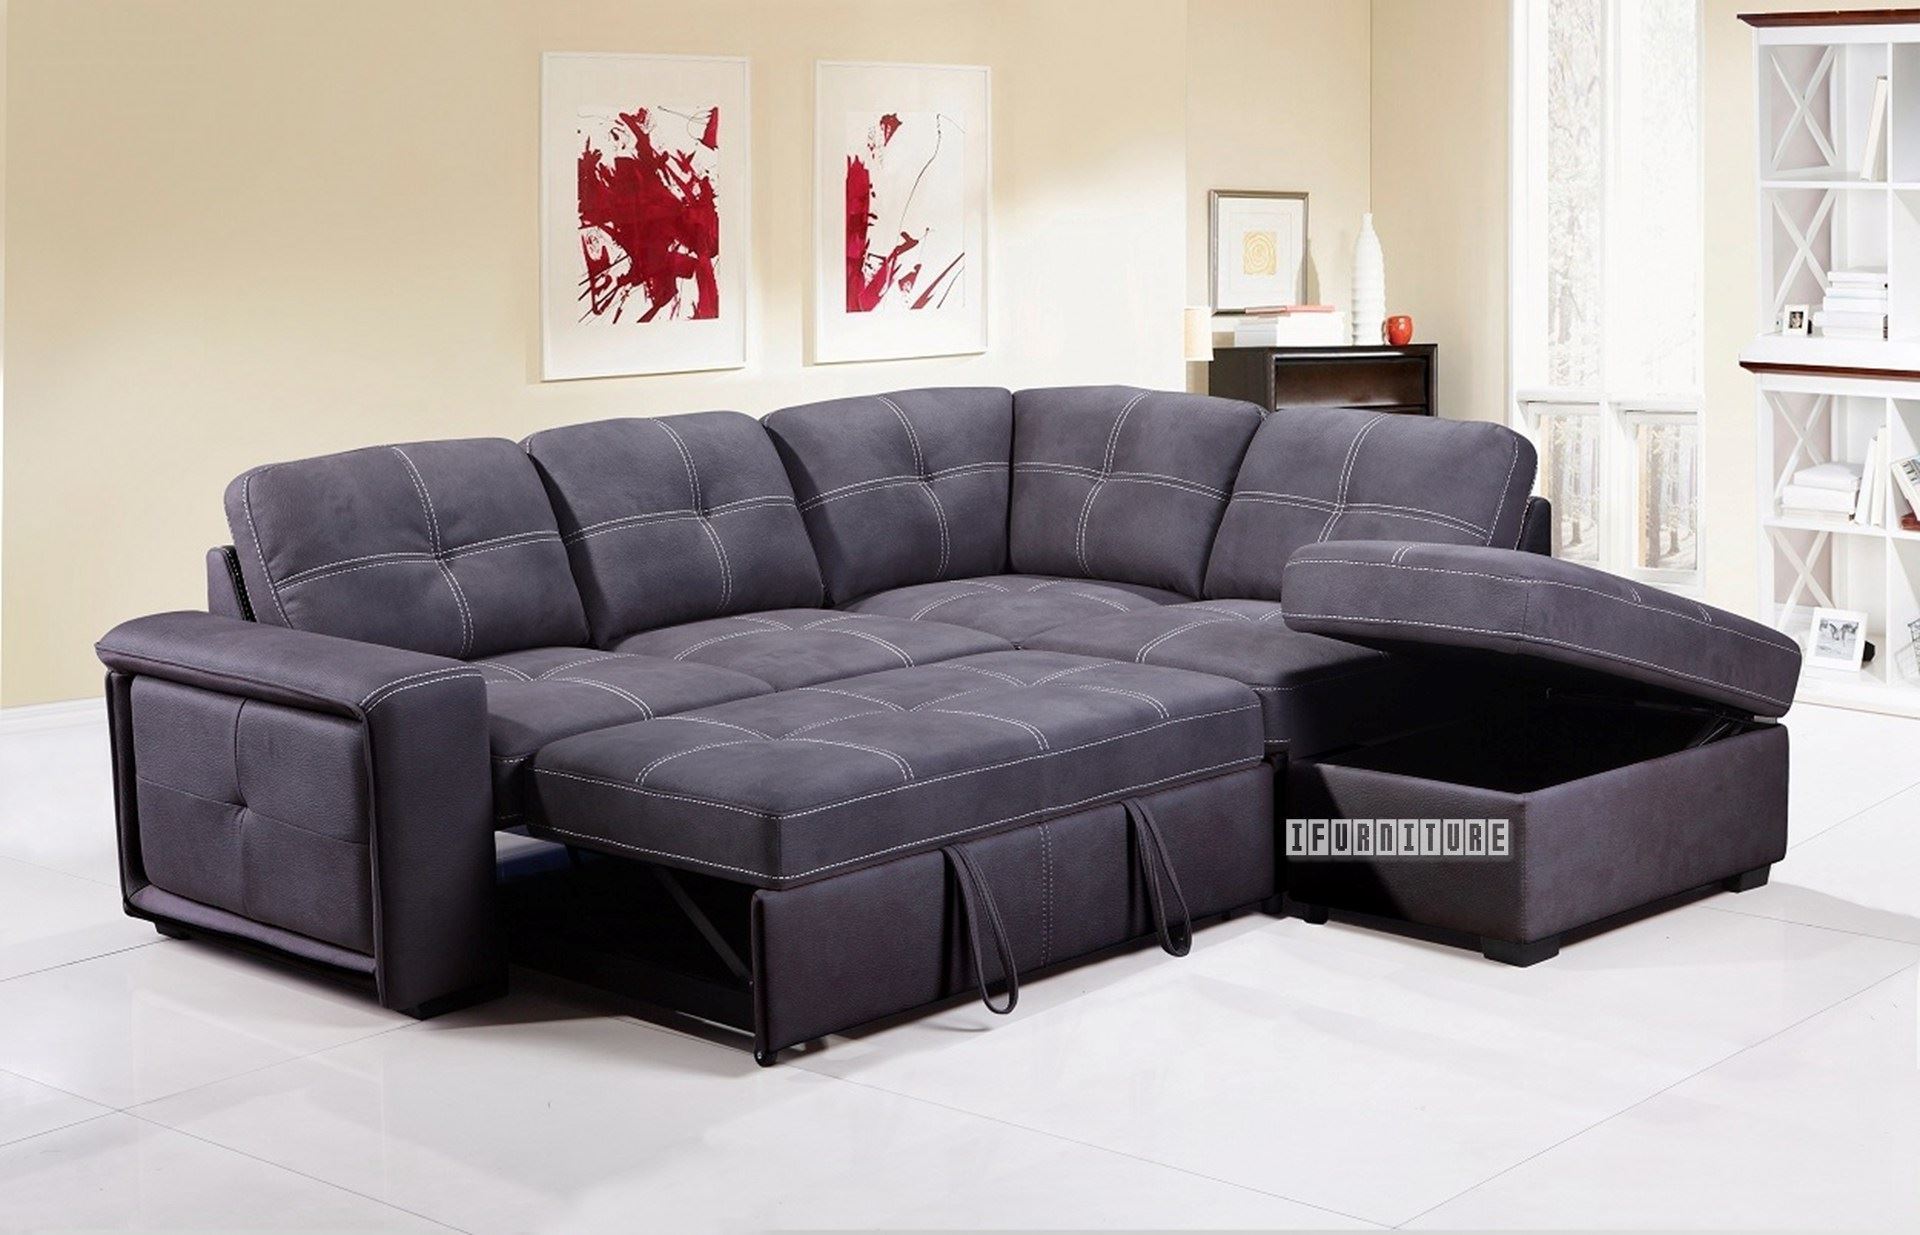 sectional sofa hideaway bed